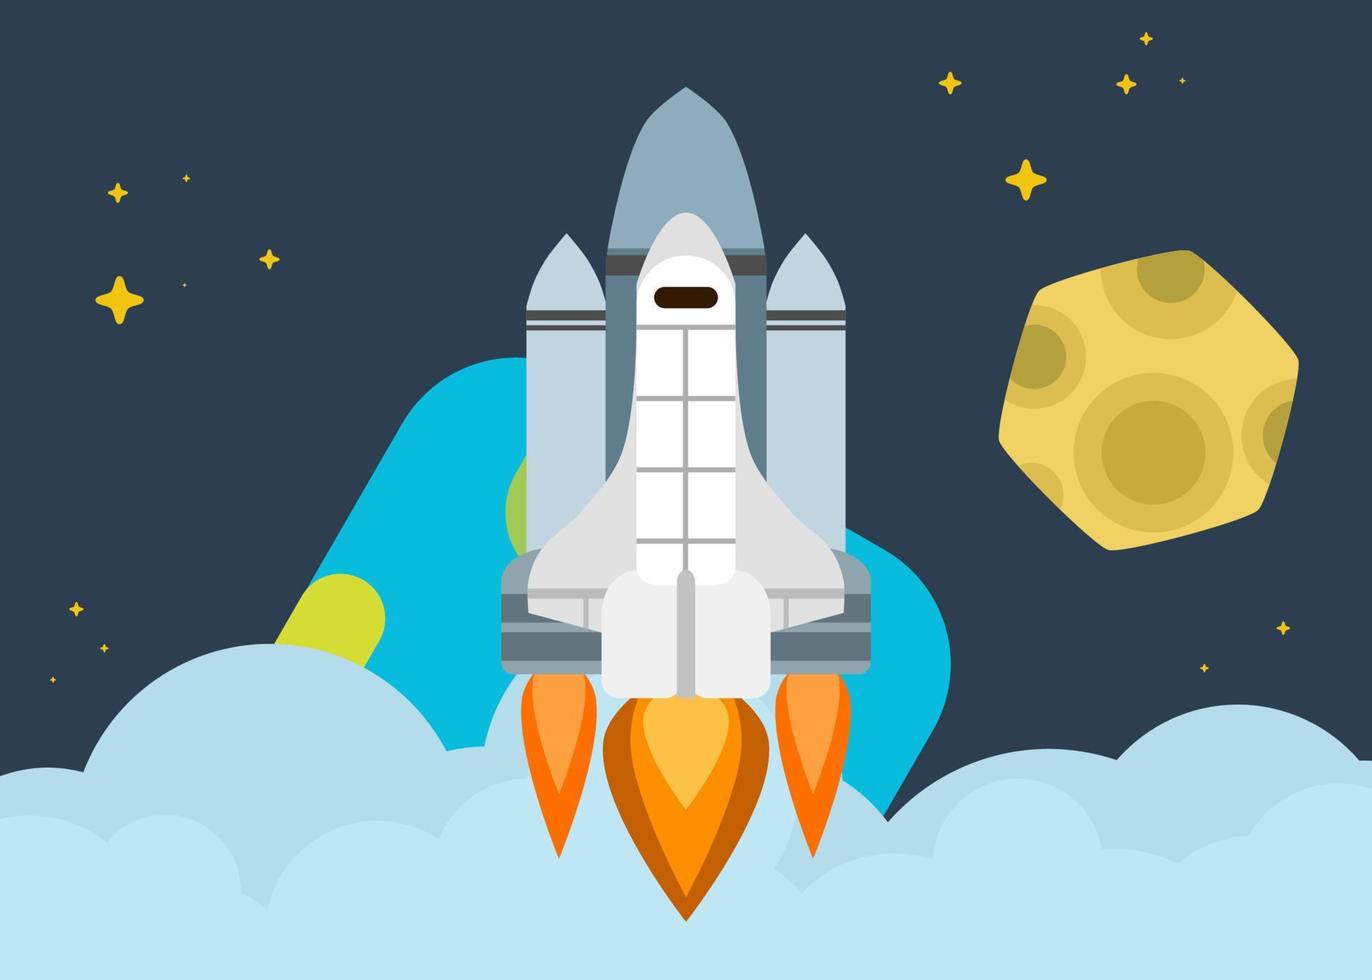 space shuttle takes off into orbit of earth bright illustration vector